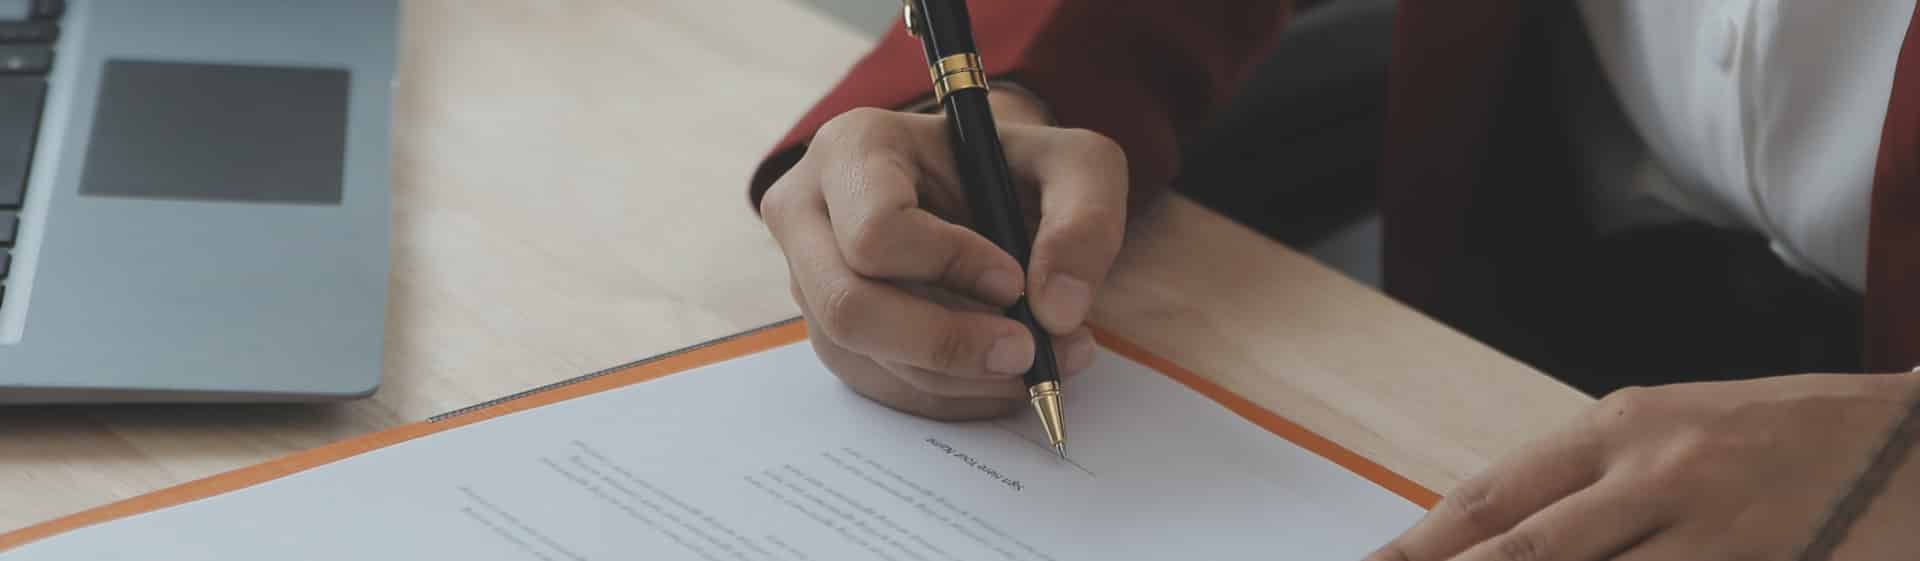 A person signing a document with a pen on probation.